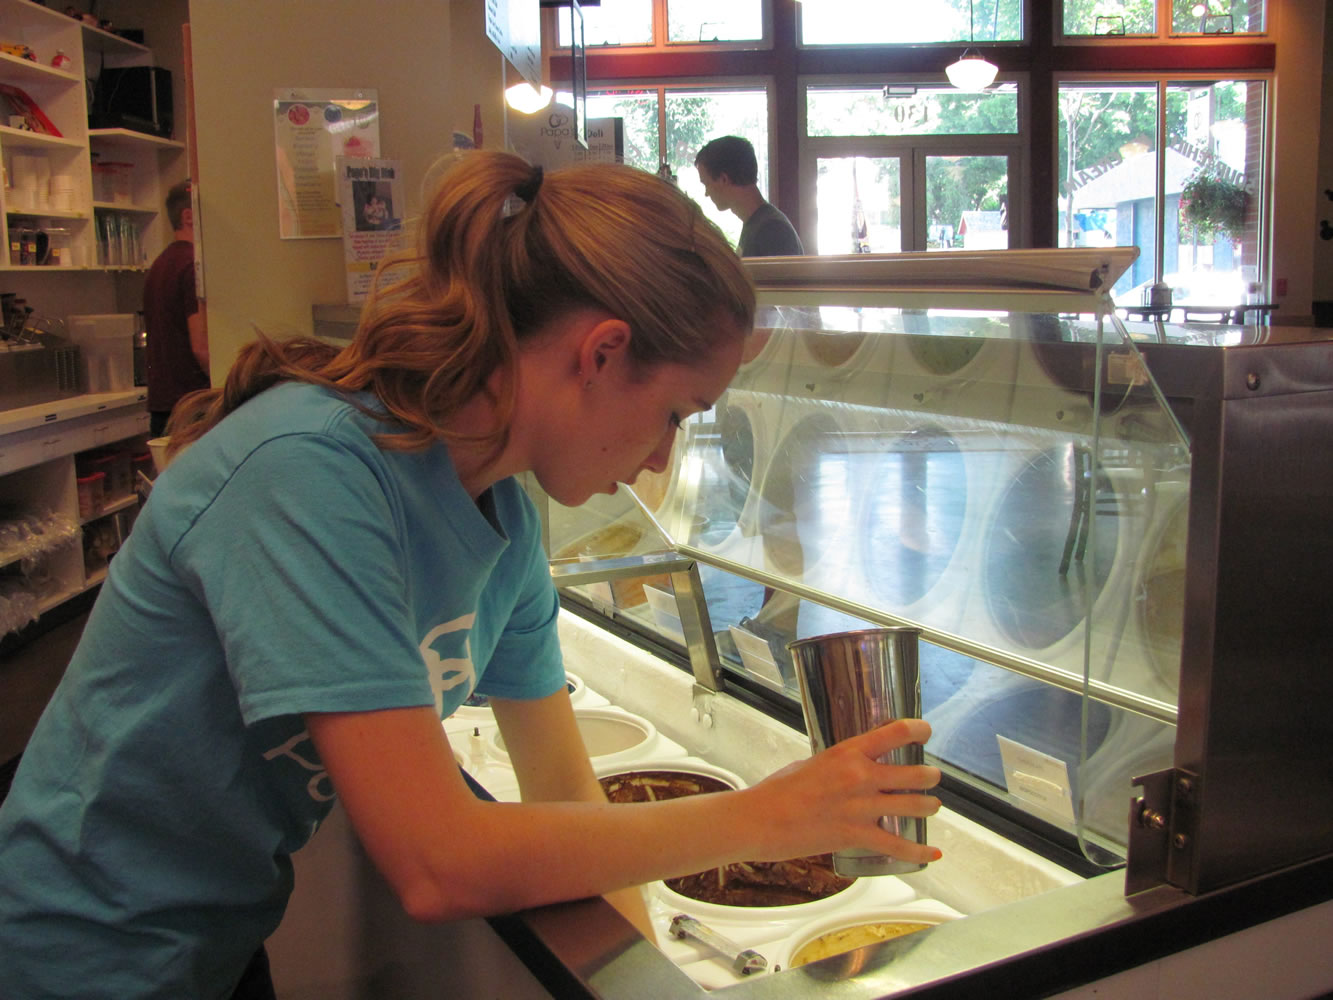 Photos by Danielle Frost/Post-Record
Lacey Little prepares a treat for a customer at Papa's Ice Cream in Washougal. She attends the University of Oregon and works at the store during school breaks and summer vacations.